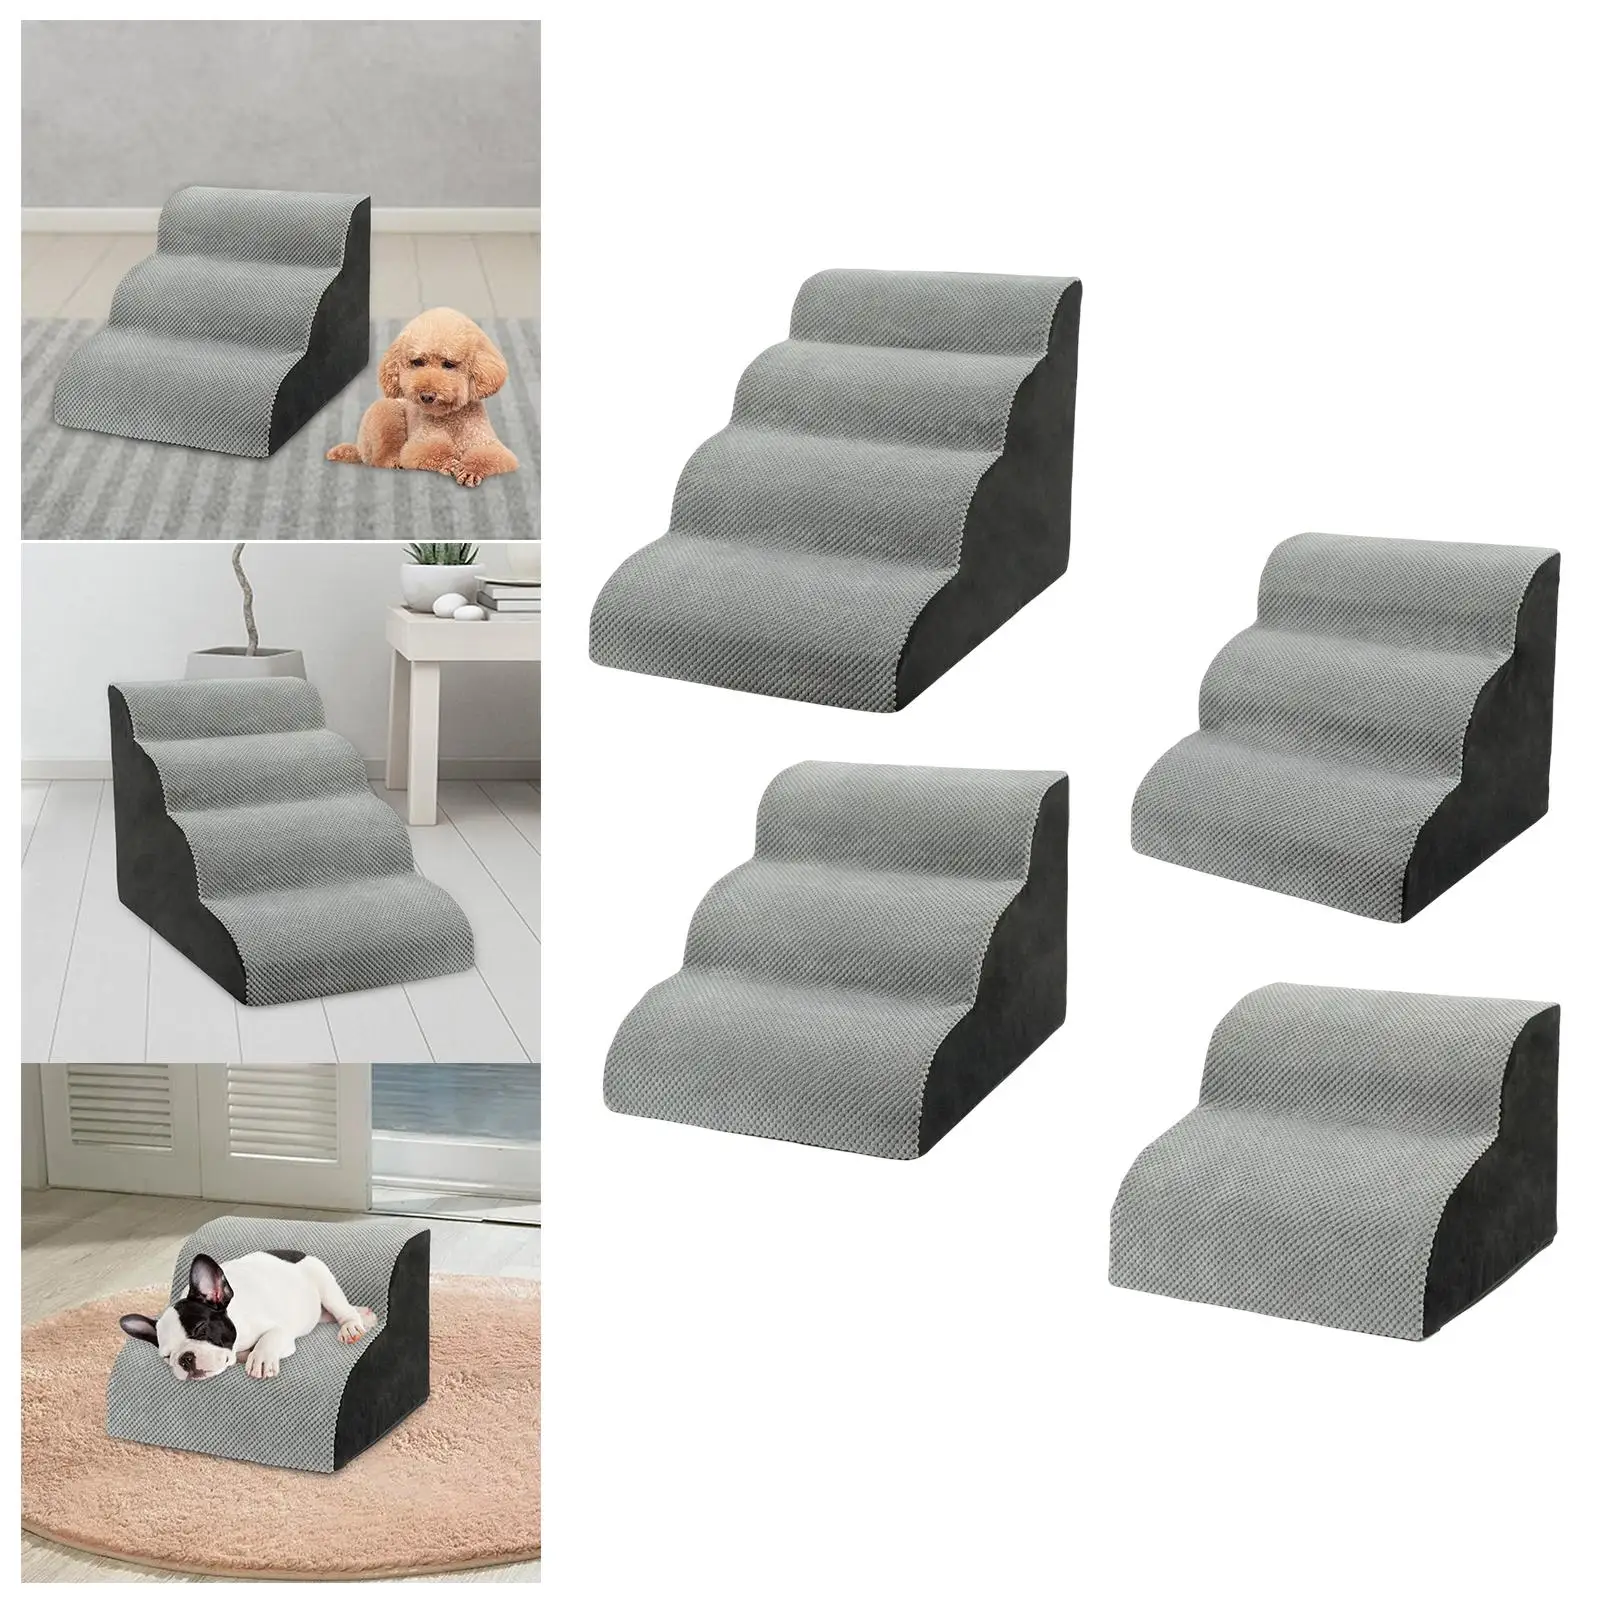 Comfortable Dog Stairs Dog Ramp Ladder Climbing Washable Cover Portable Slope Dog Bed Stairs Pet Stairs Older Dogs Couch Bed